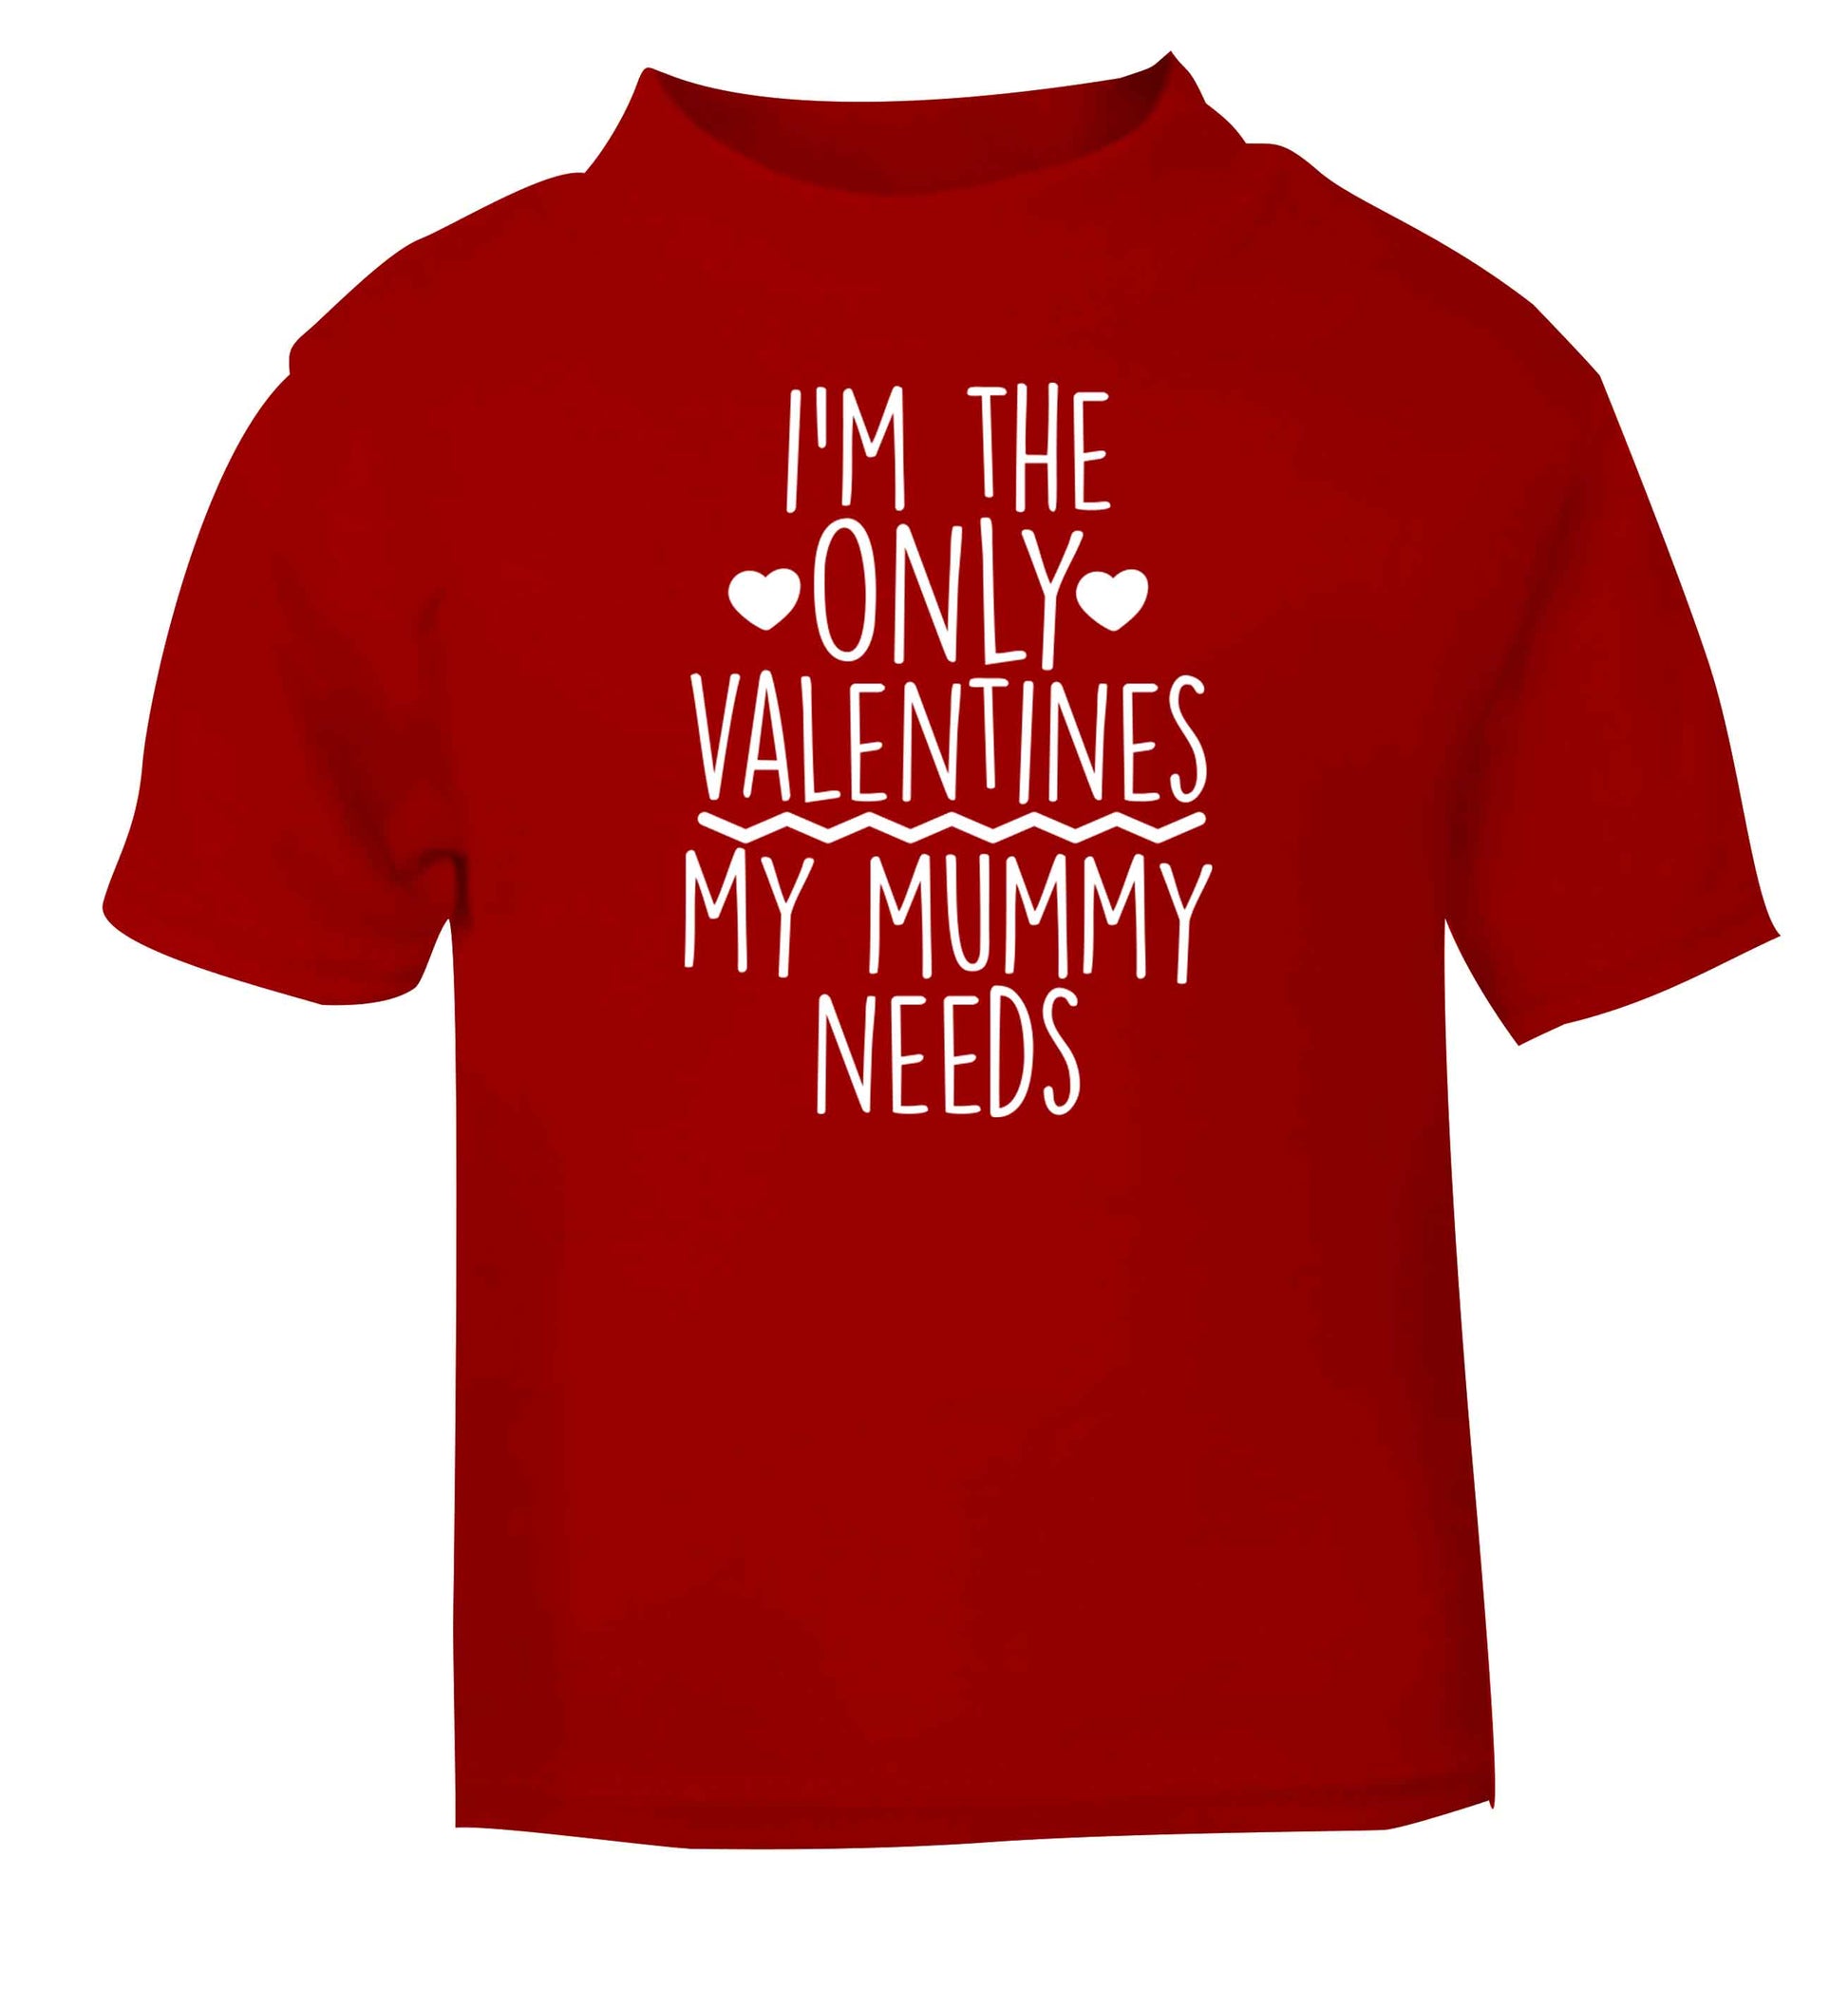 I'm the only valentines my mummy needs red baby toddler Tshirt 2 Years